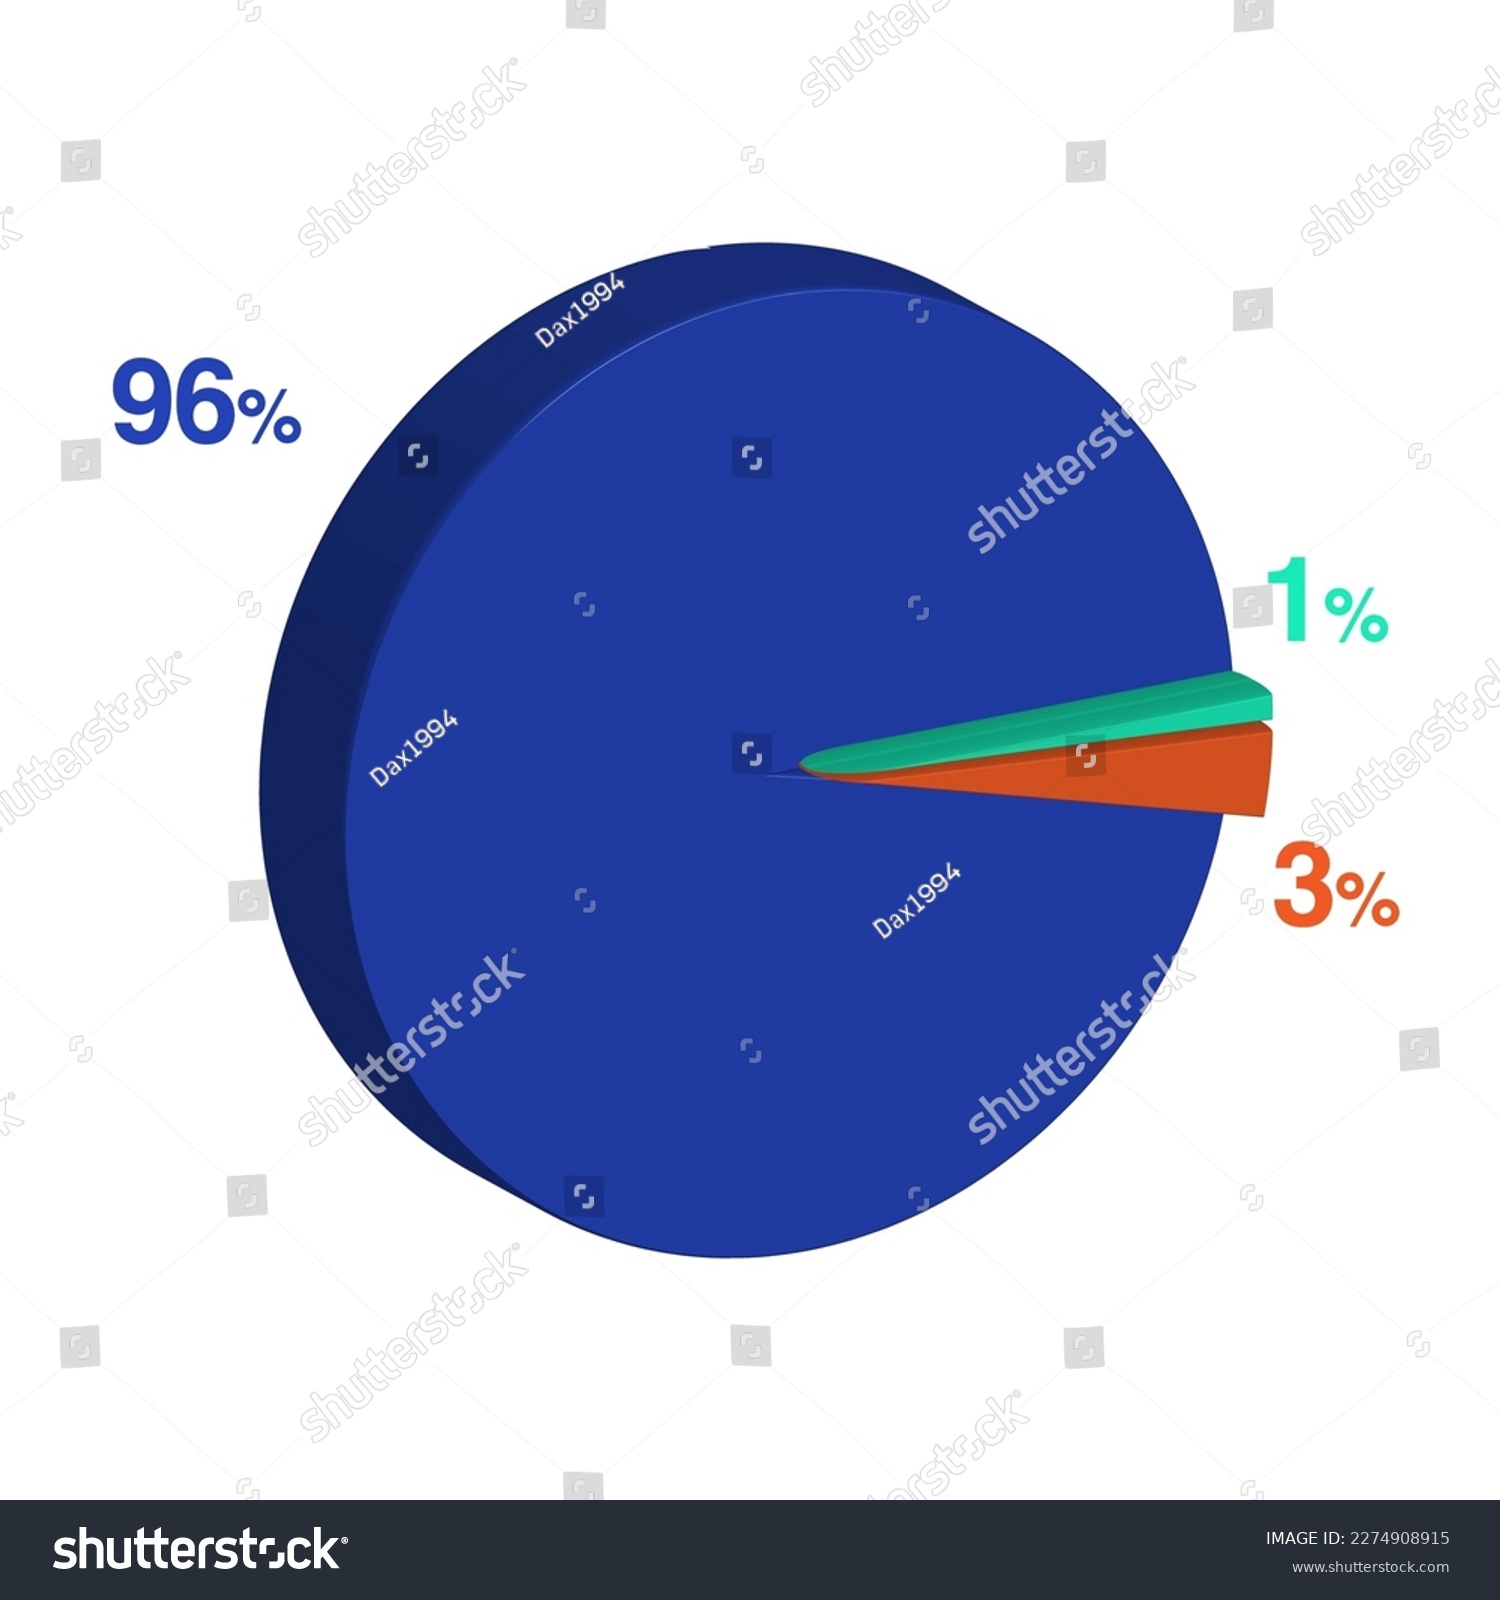 SVG of ninety six three 3 96 1 one percent 3d Isometric 3 part pie chart diagram for business presentation. Vector infographics illustration eps. svg